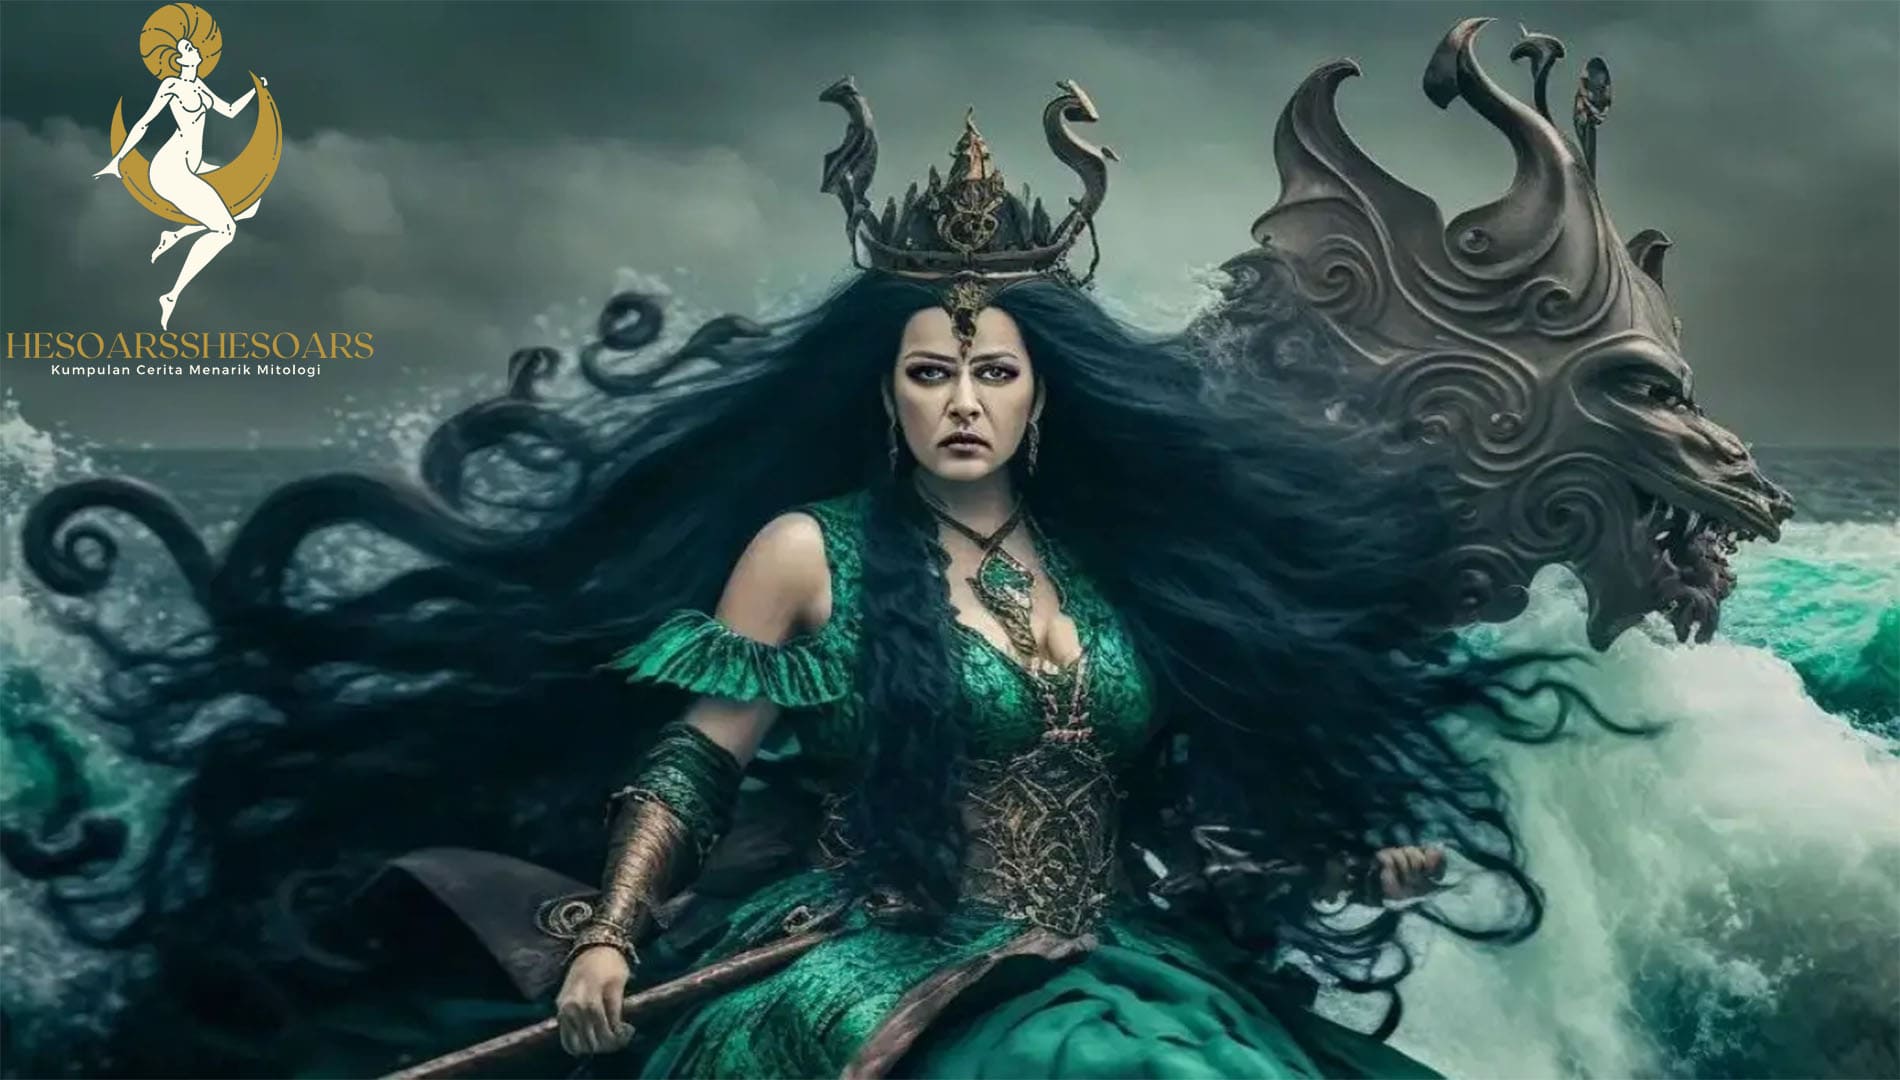 Nyi Roro Kidul: The Enigmatic Sea Queen of Indonesian Myth